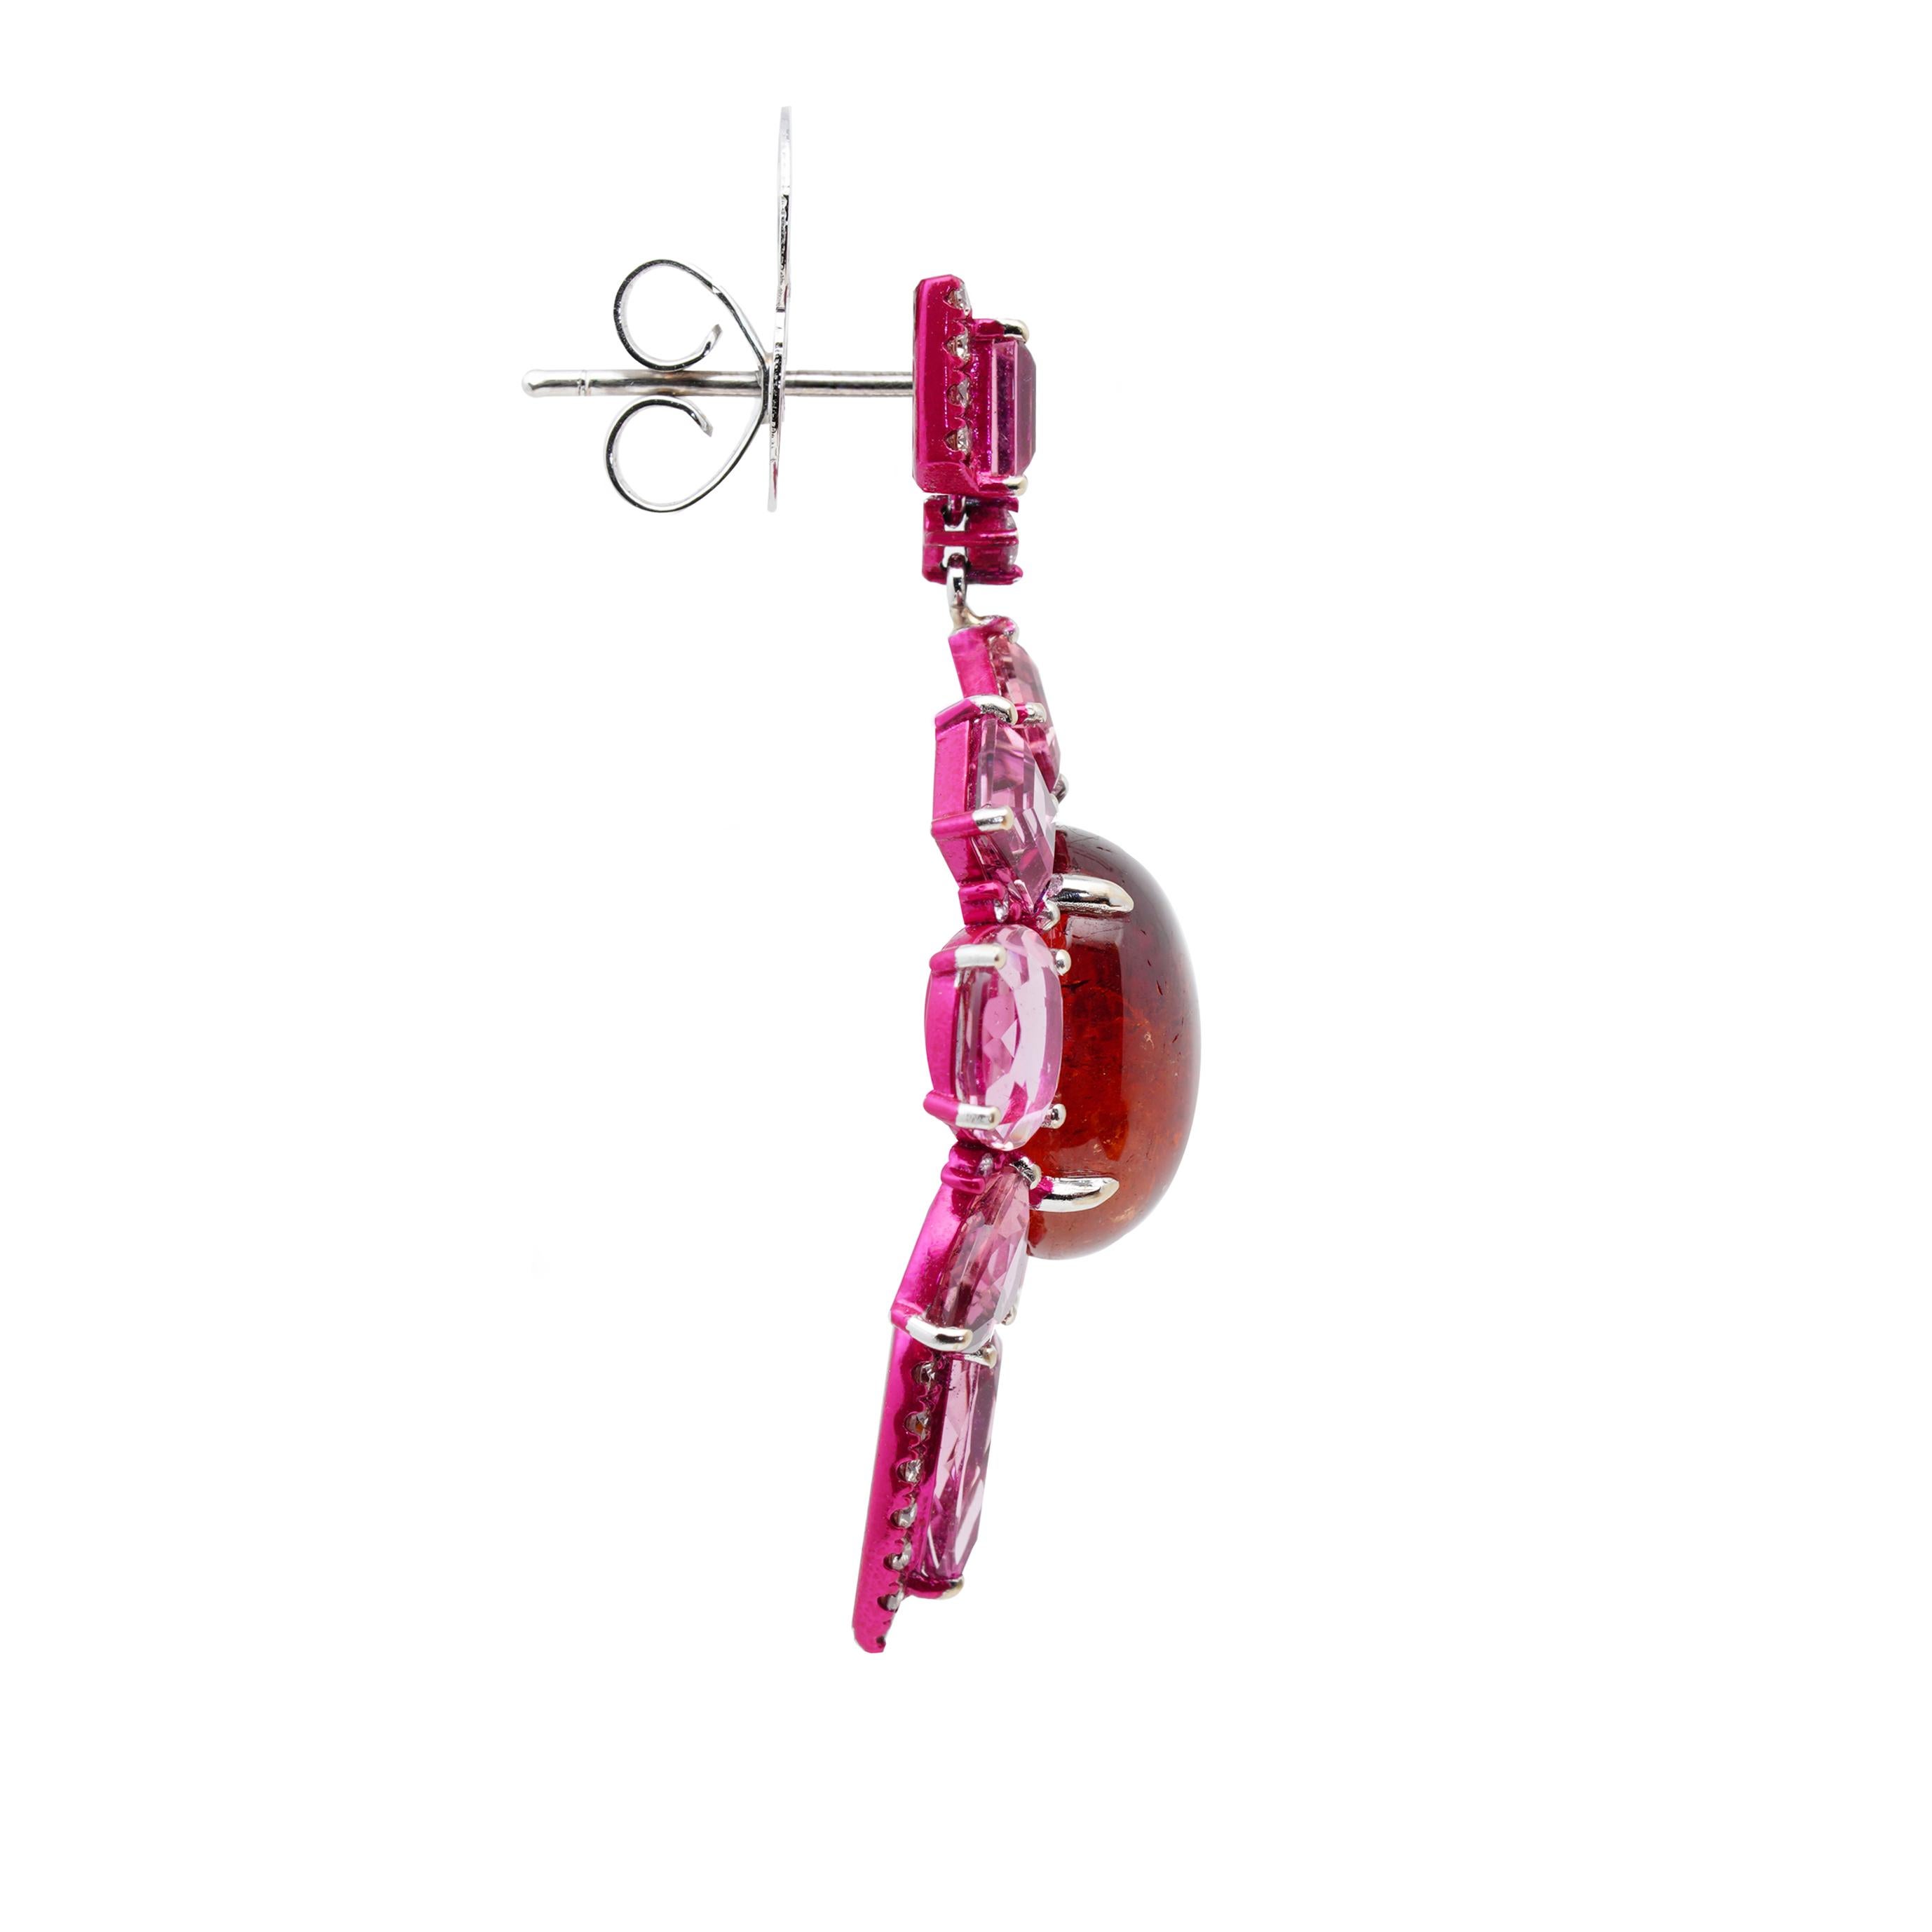 This simple yet exquisite pair of Spessartite Garnet and Pink Tourmaline Earrings by Austy Lee is a must-have! This timeless piece is suitable for daily wear. The center stones feature cabochon Spessartite Garnet with approximately 11 carats each,